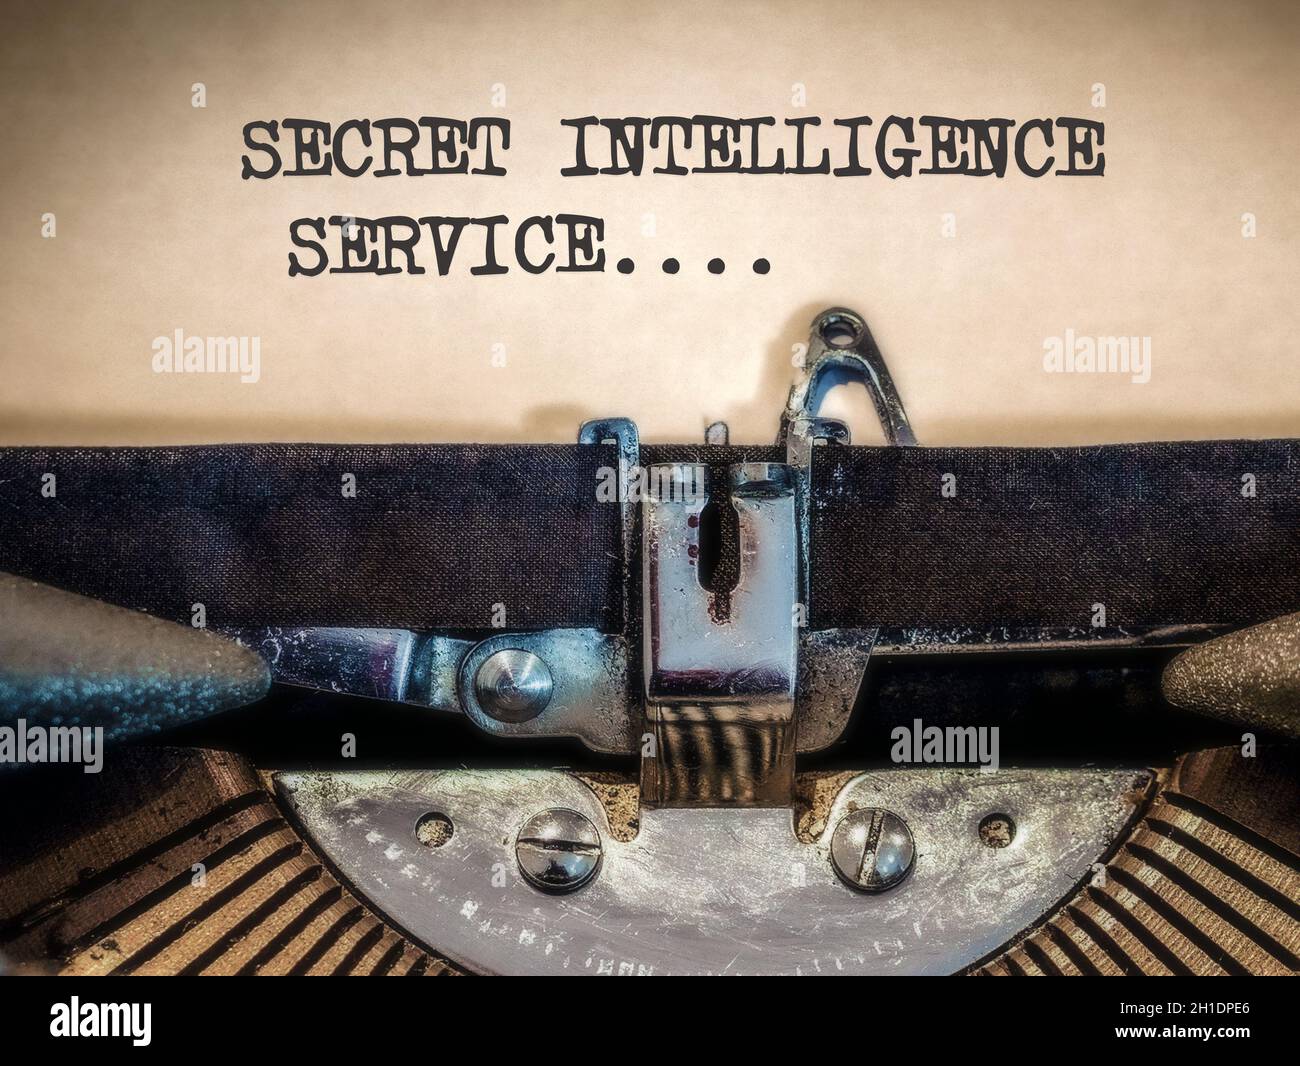 Secret Intelligence Service, displayed on a classic, vintage mechanical typewriter, typed on a cream coloured piece of paper with dark vignette Stock Photo